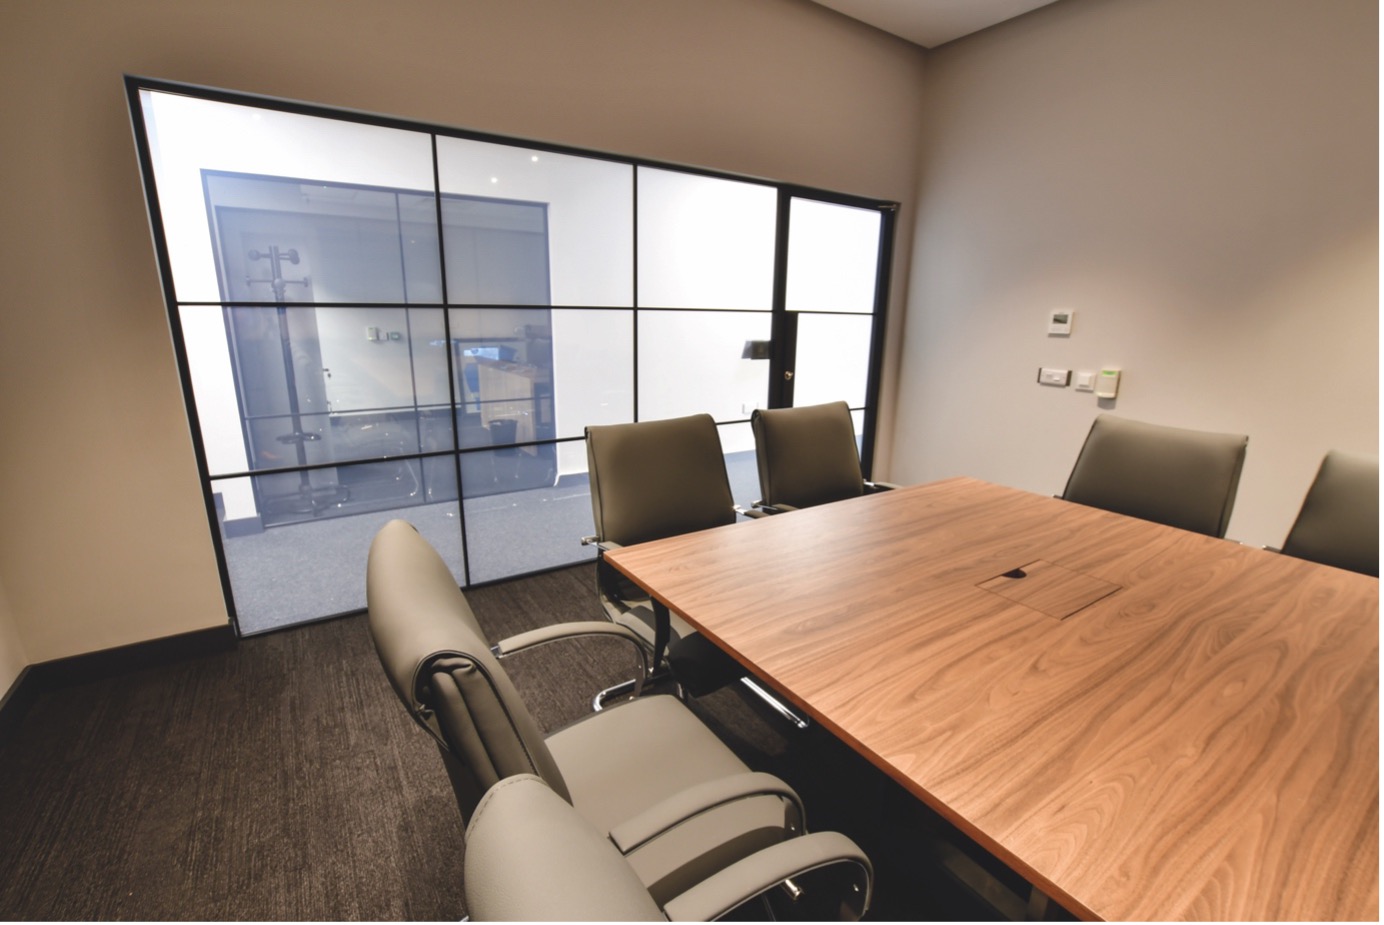 Meeting room with clear glass window